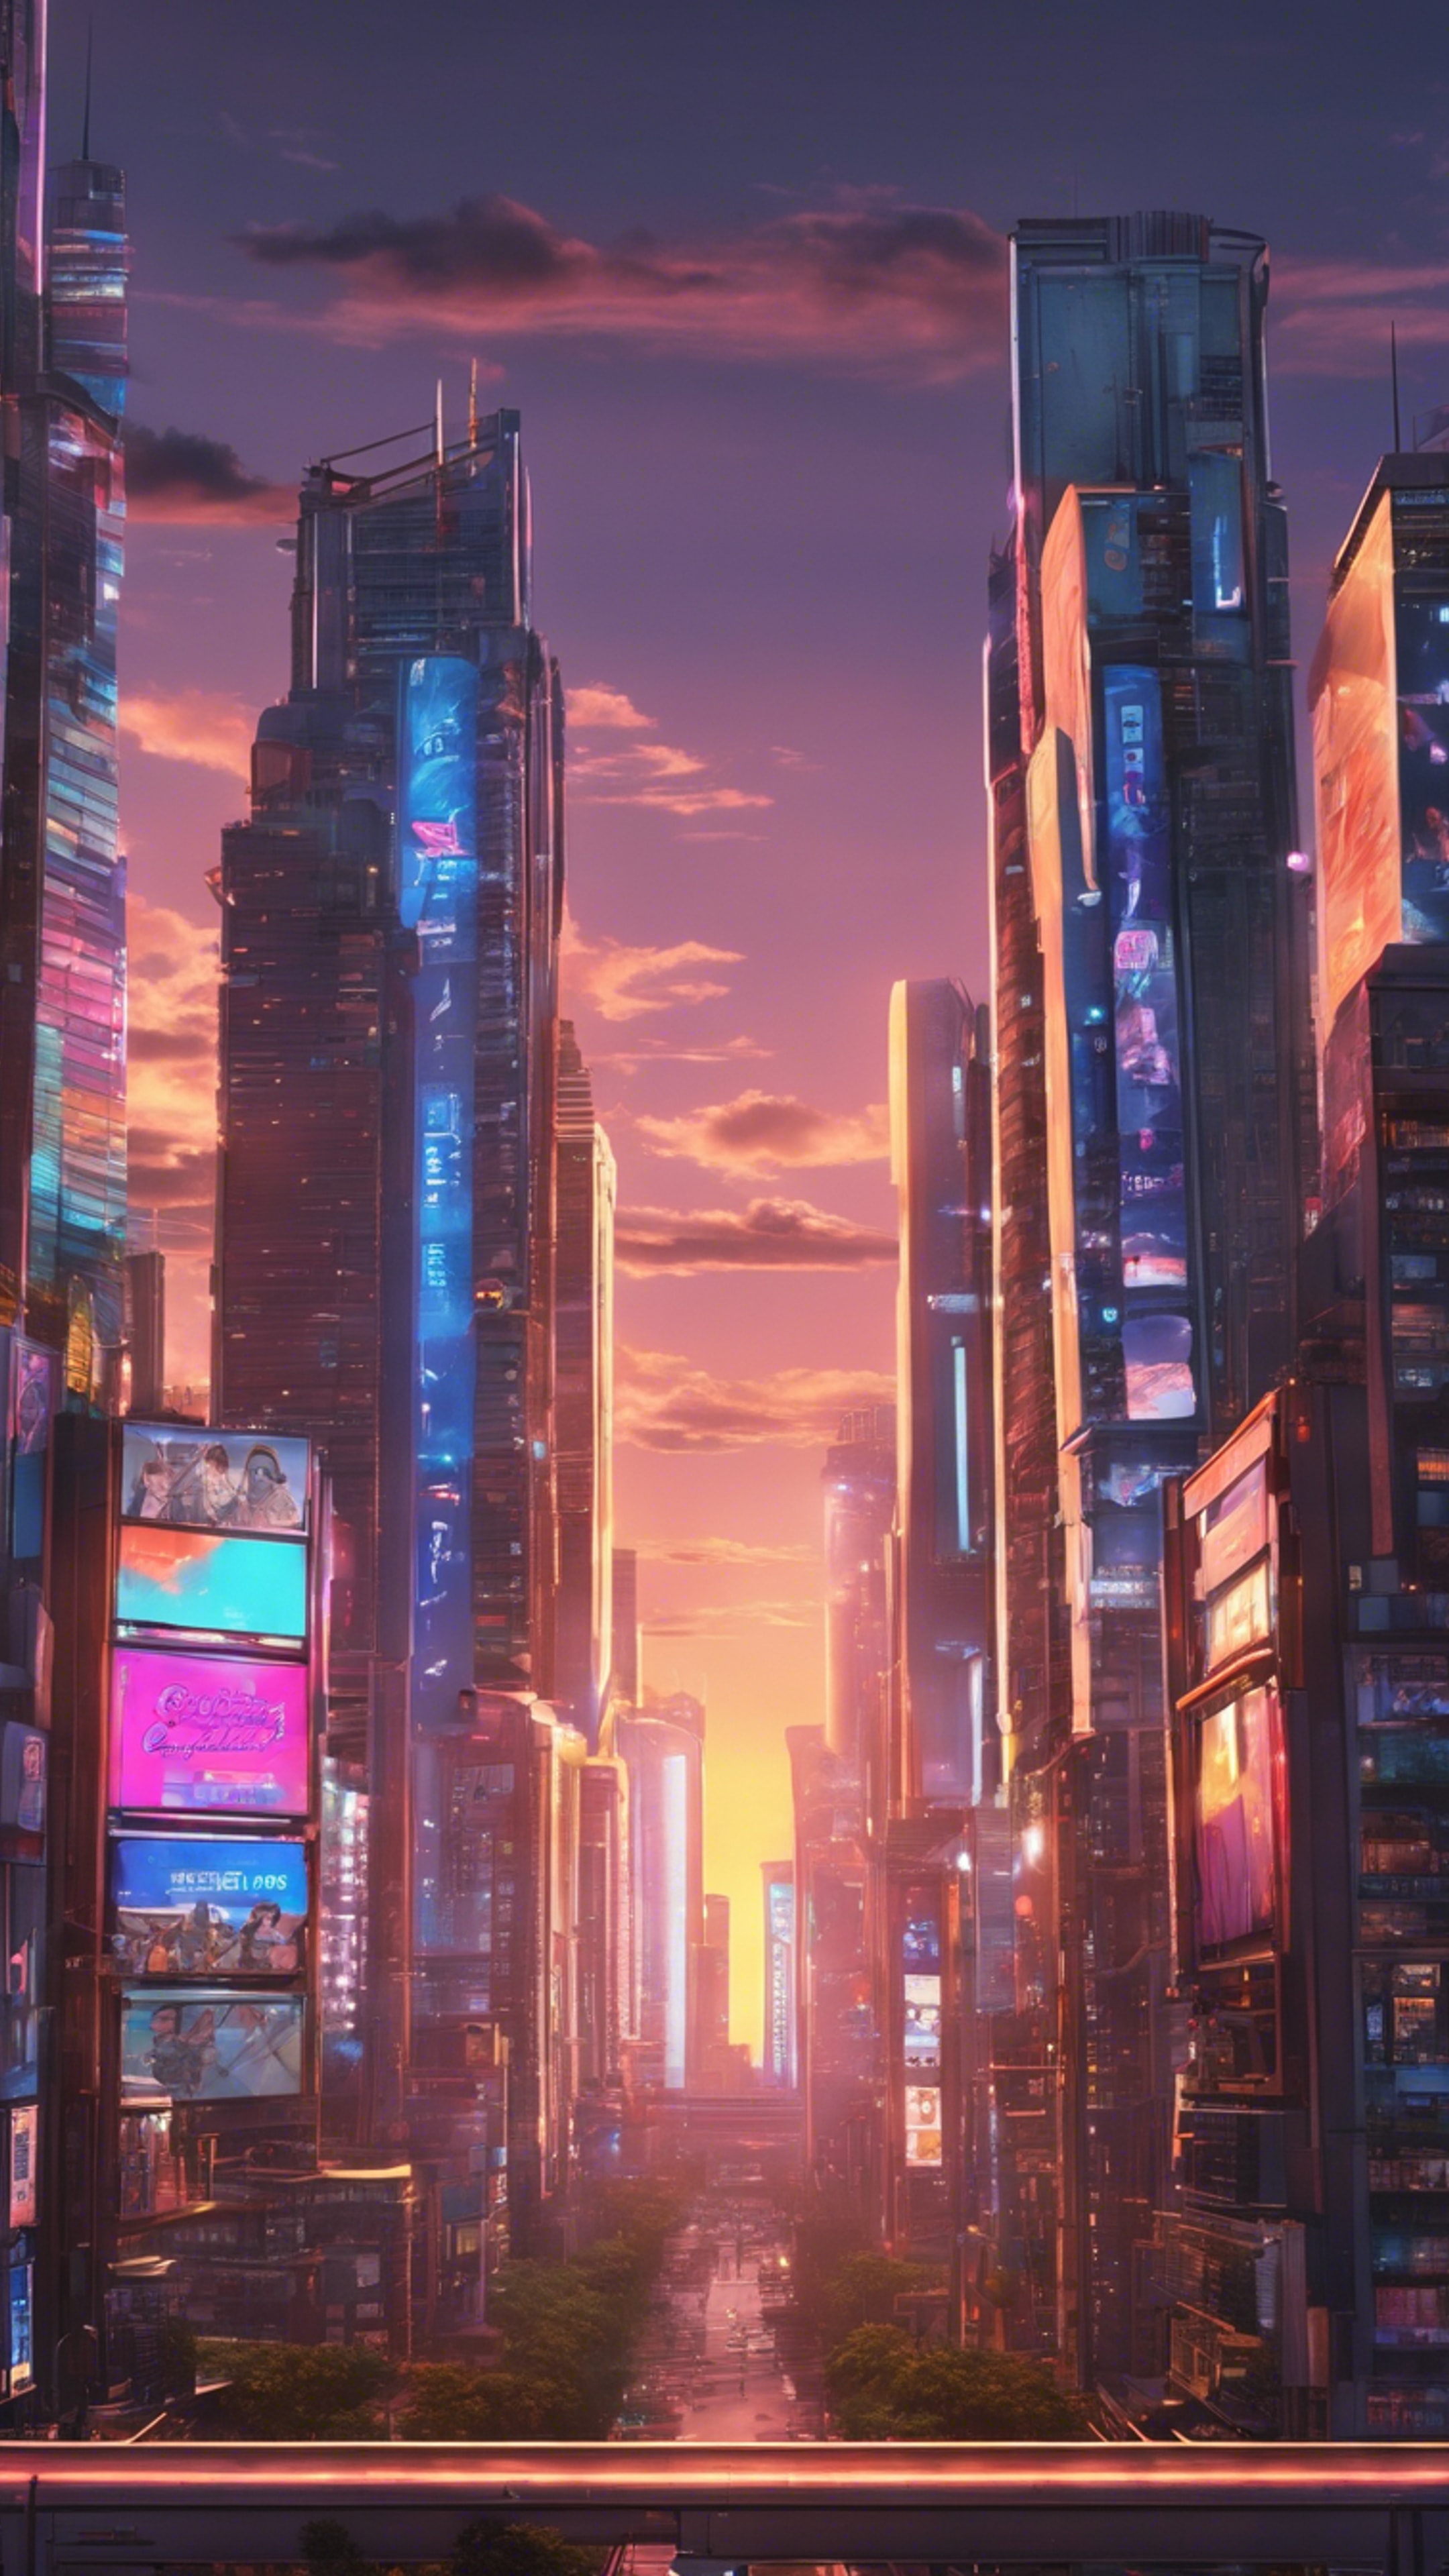 A cool anime-themed cityscape at sunset with towering skyscrapers and glowing neon billboards. Tapeta[63ed83801d984cce89ed]